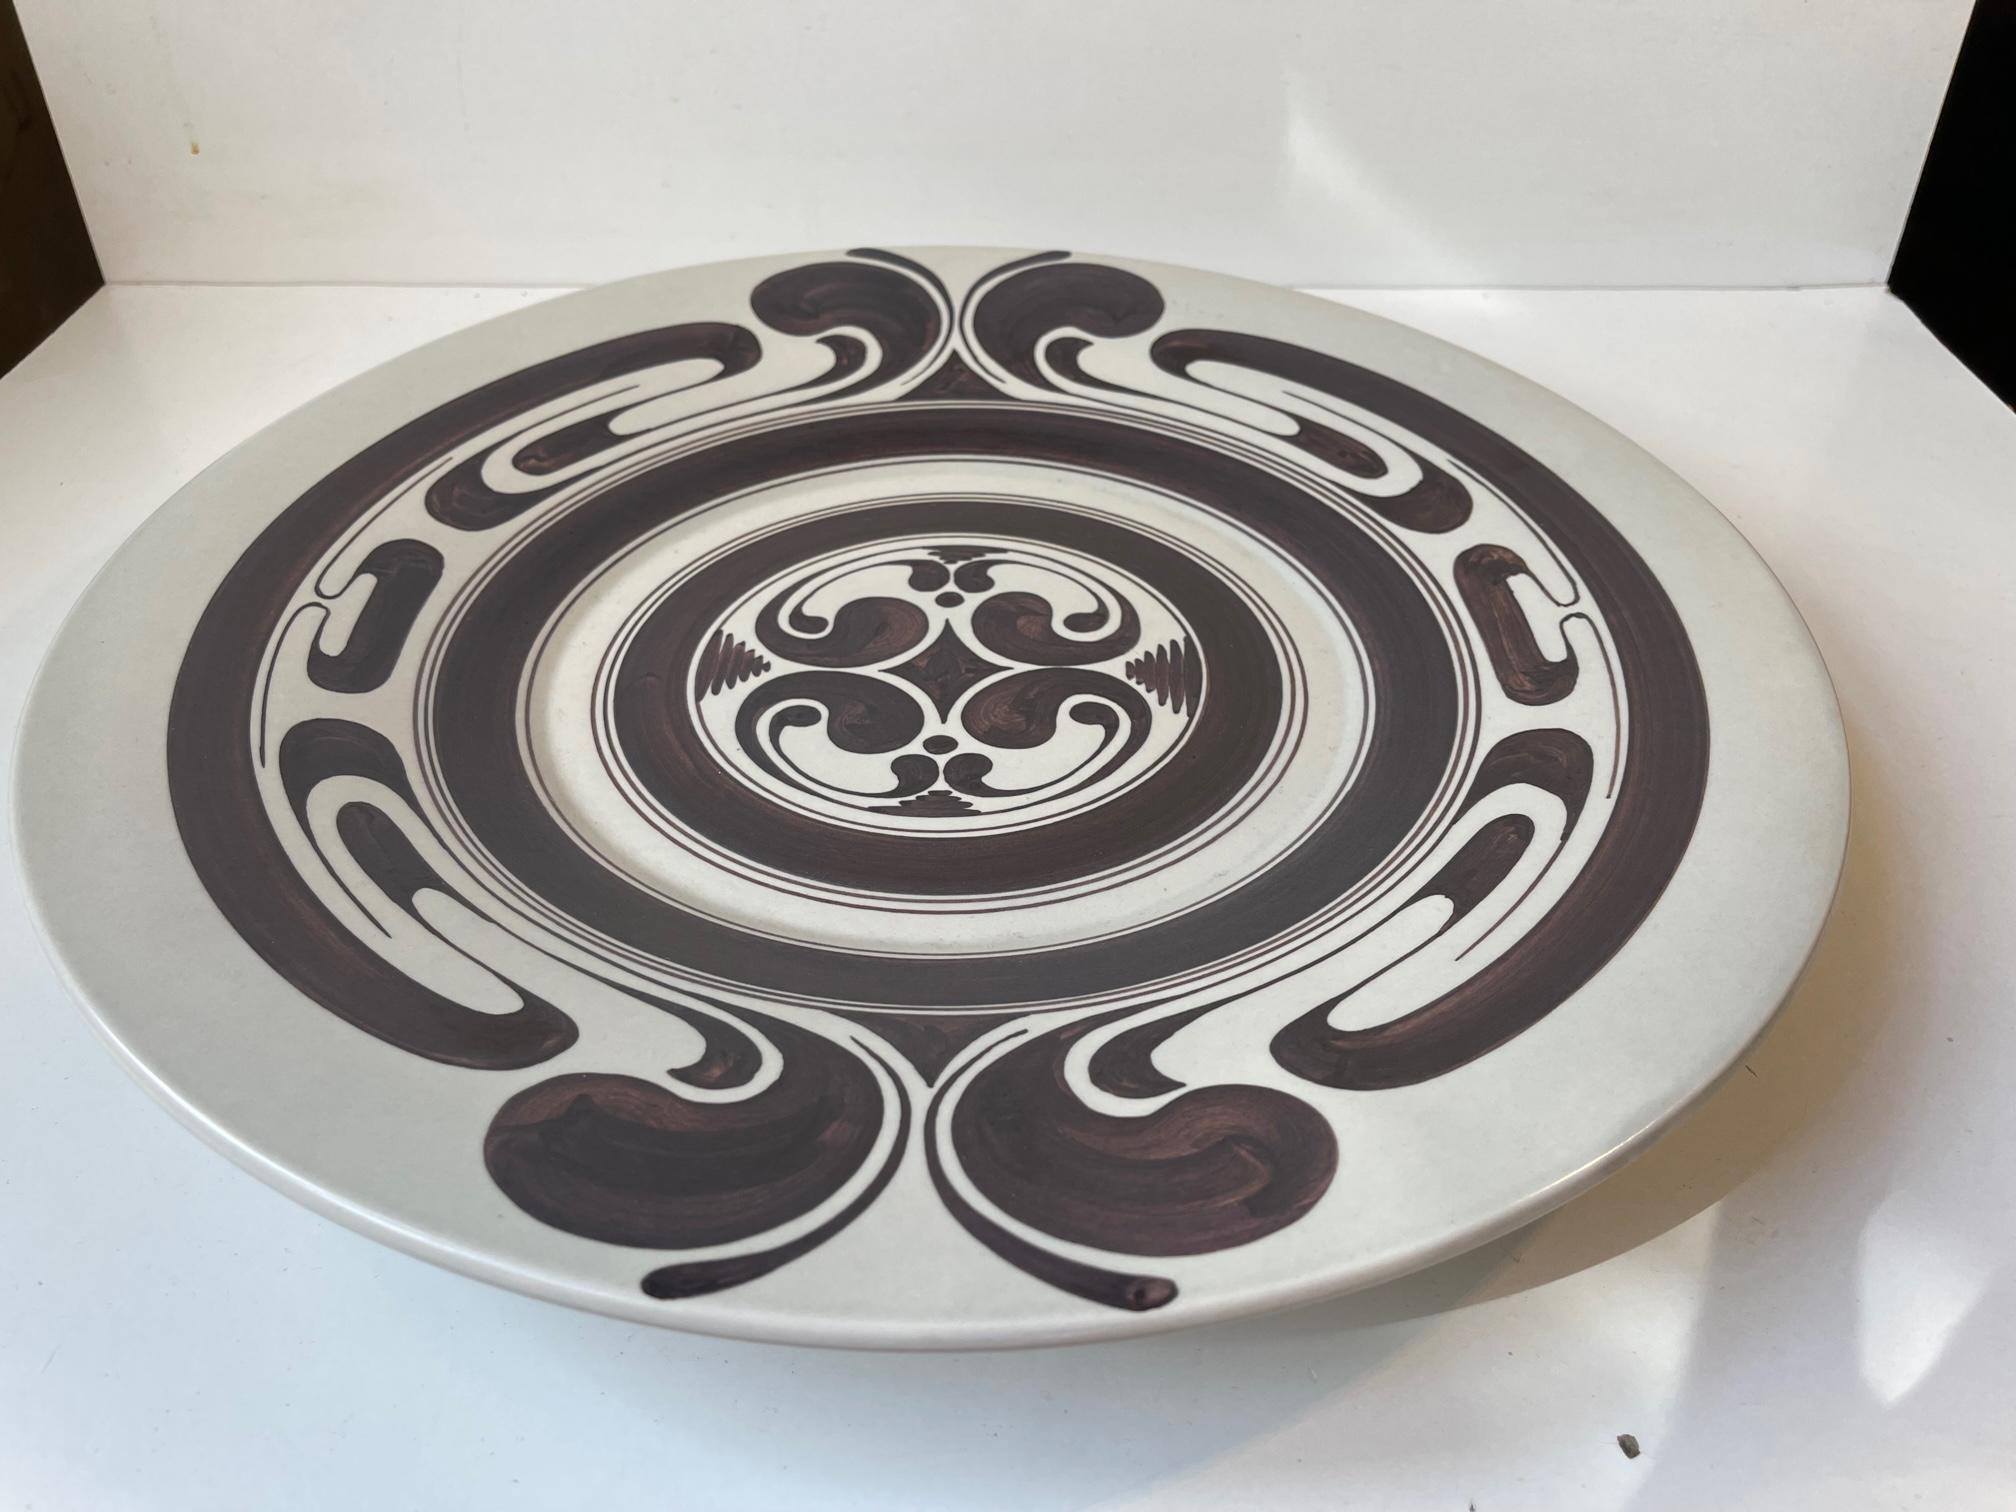 Large decorative charger dish, centerpiece or wall plaque in handpainted ceramics. Designed and made at Rosenthal in Germany circa 1970-80. It features a skillfully and 'quick' executed center motif in a dark brown/burgundy color. Very fine vintage